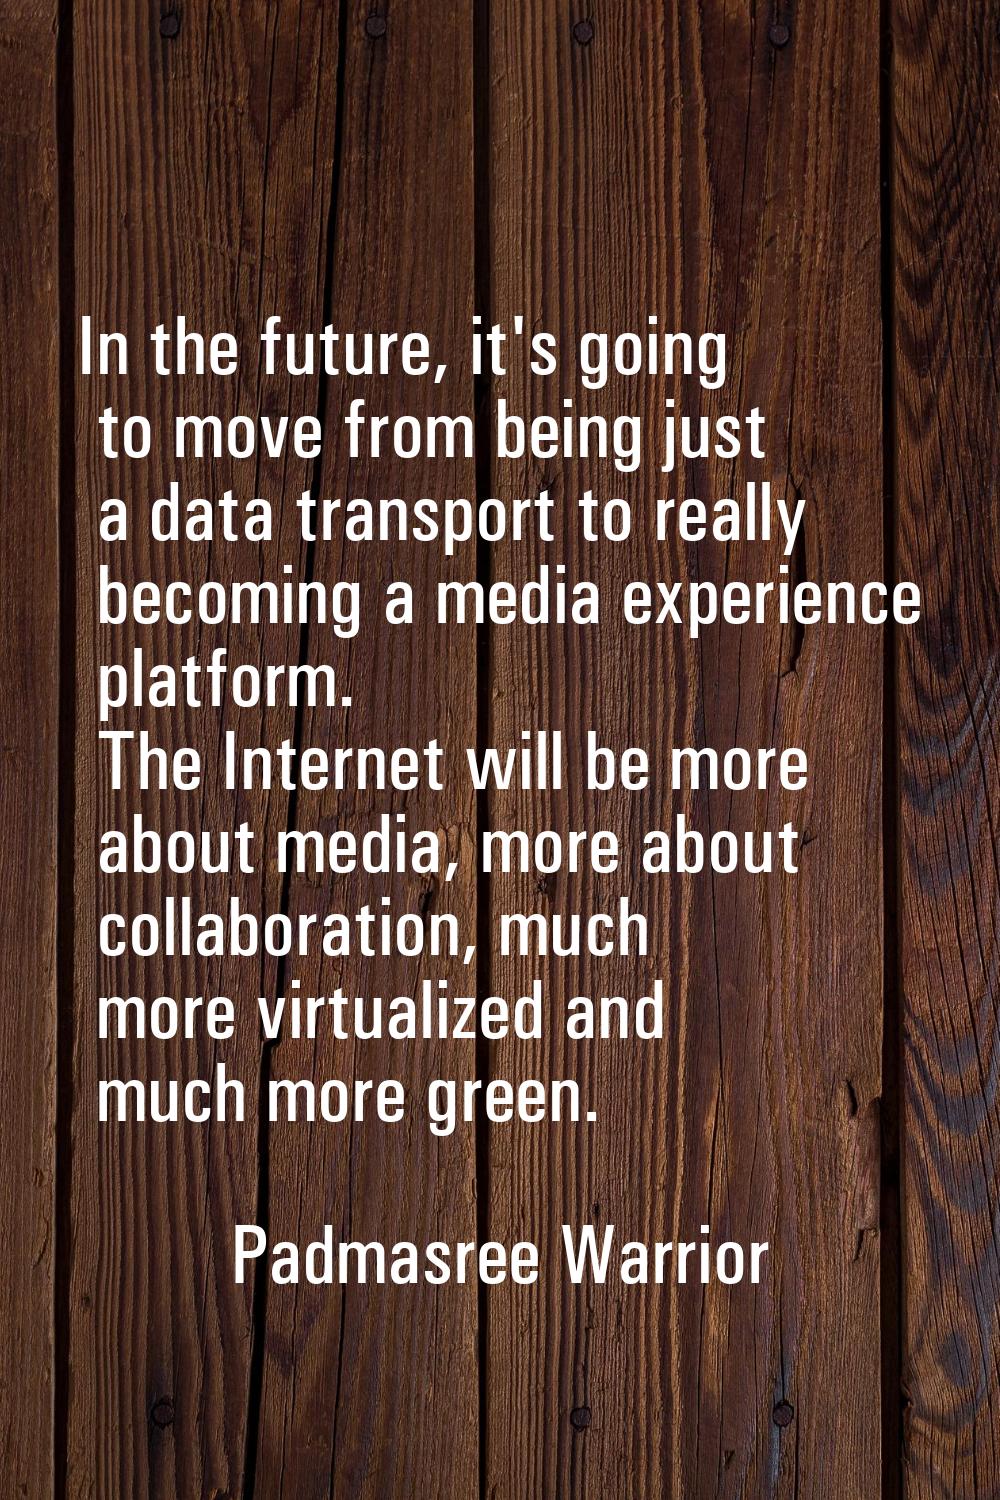 In the future, it's going to move from being just a data transport to really becoming a media exper